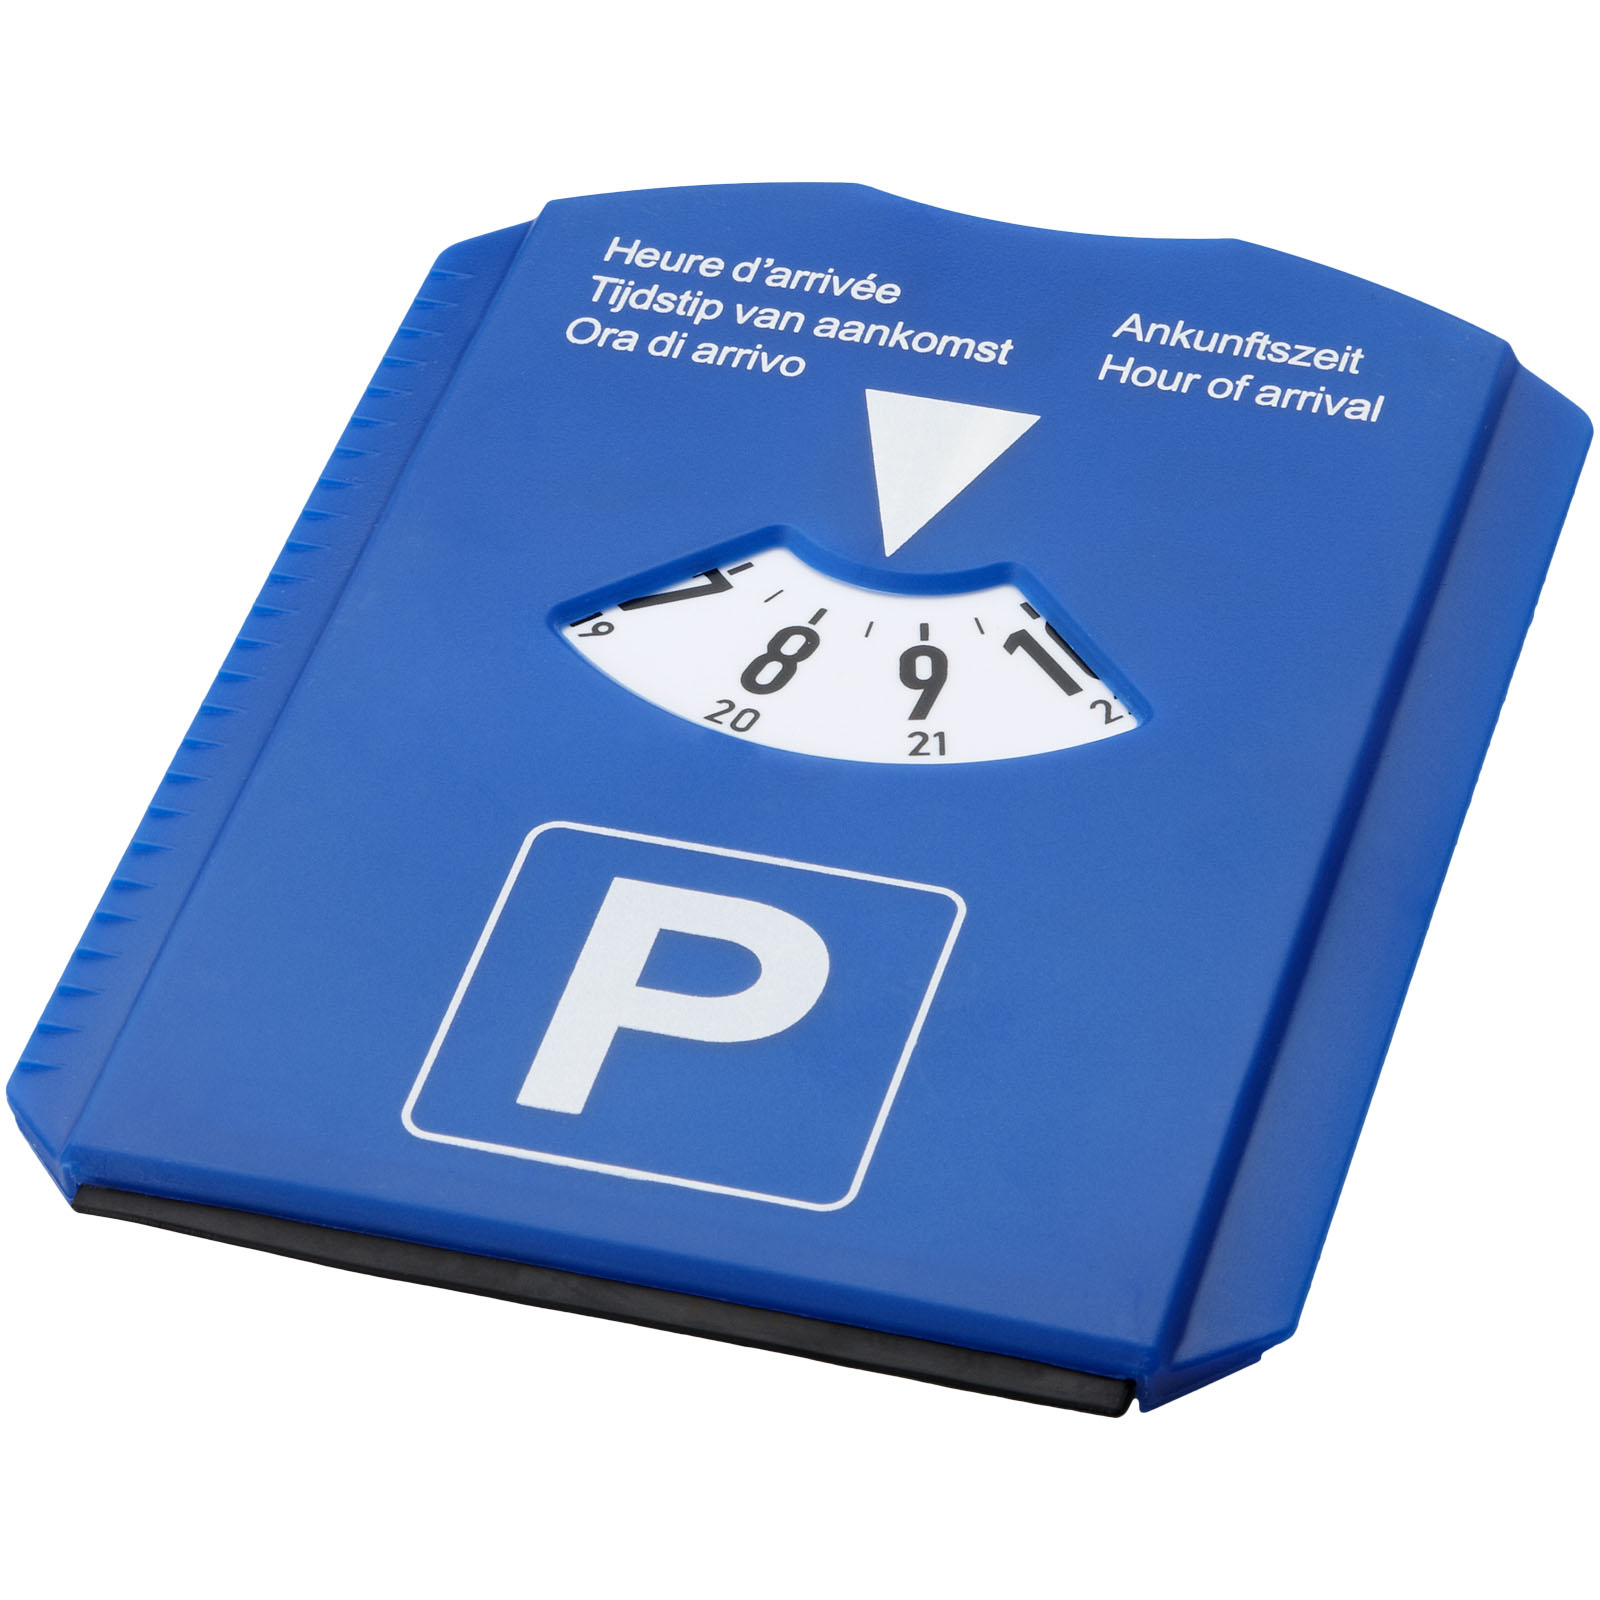 Advertising Car Accessories - Spot 5-in-1 parking disc - 0